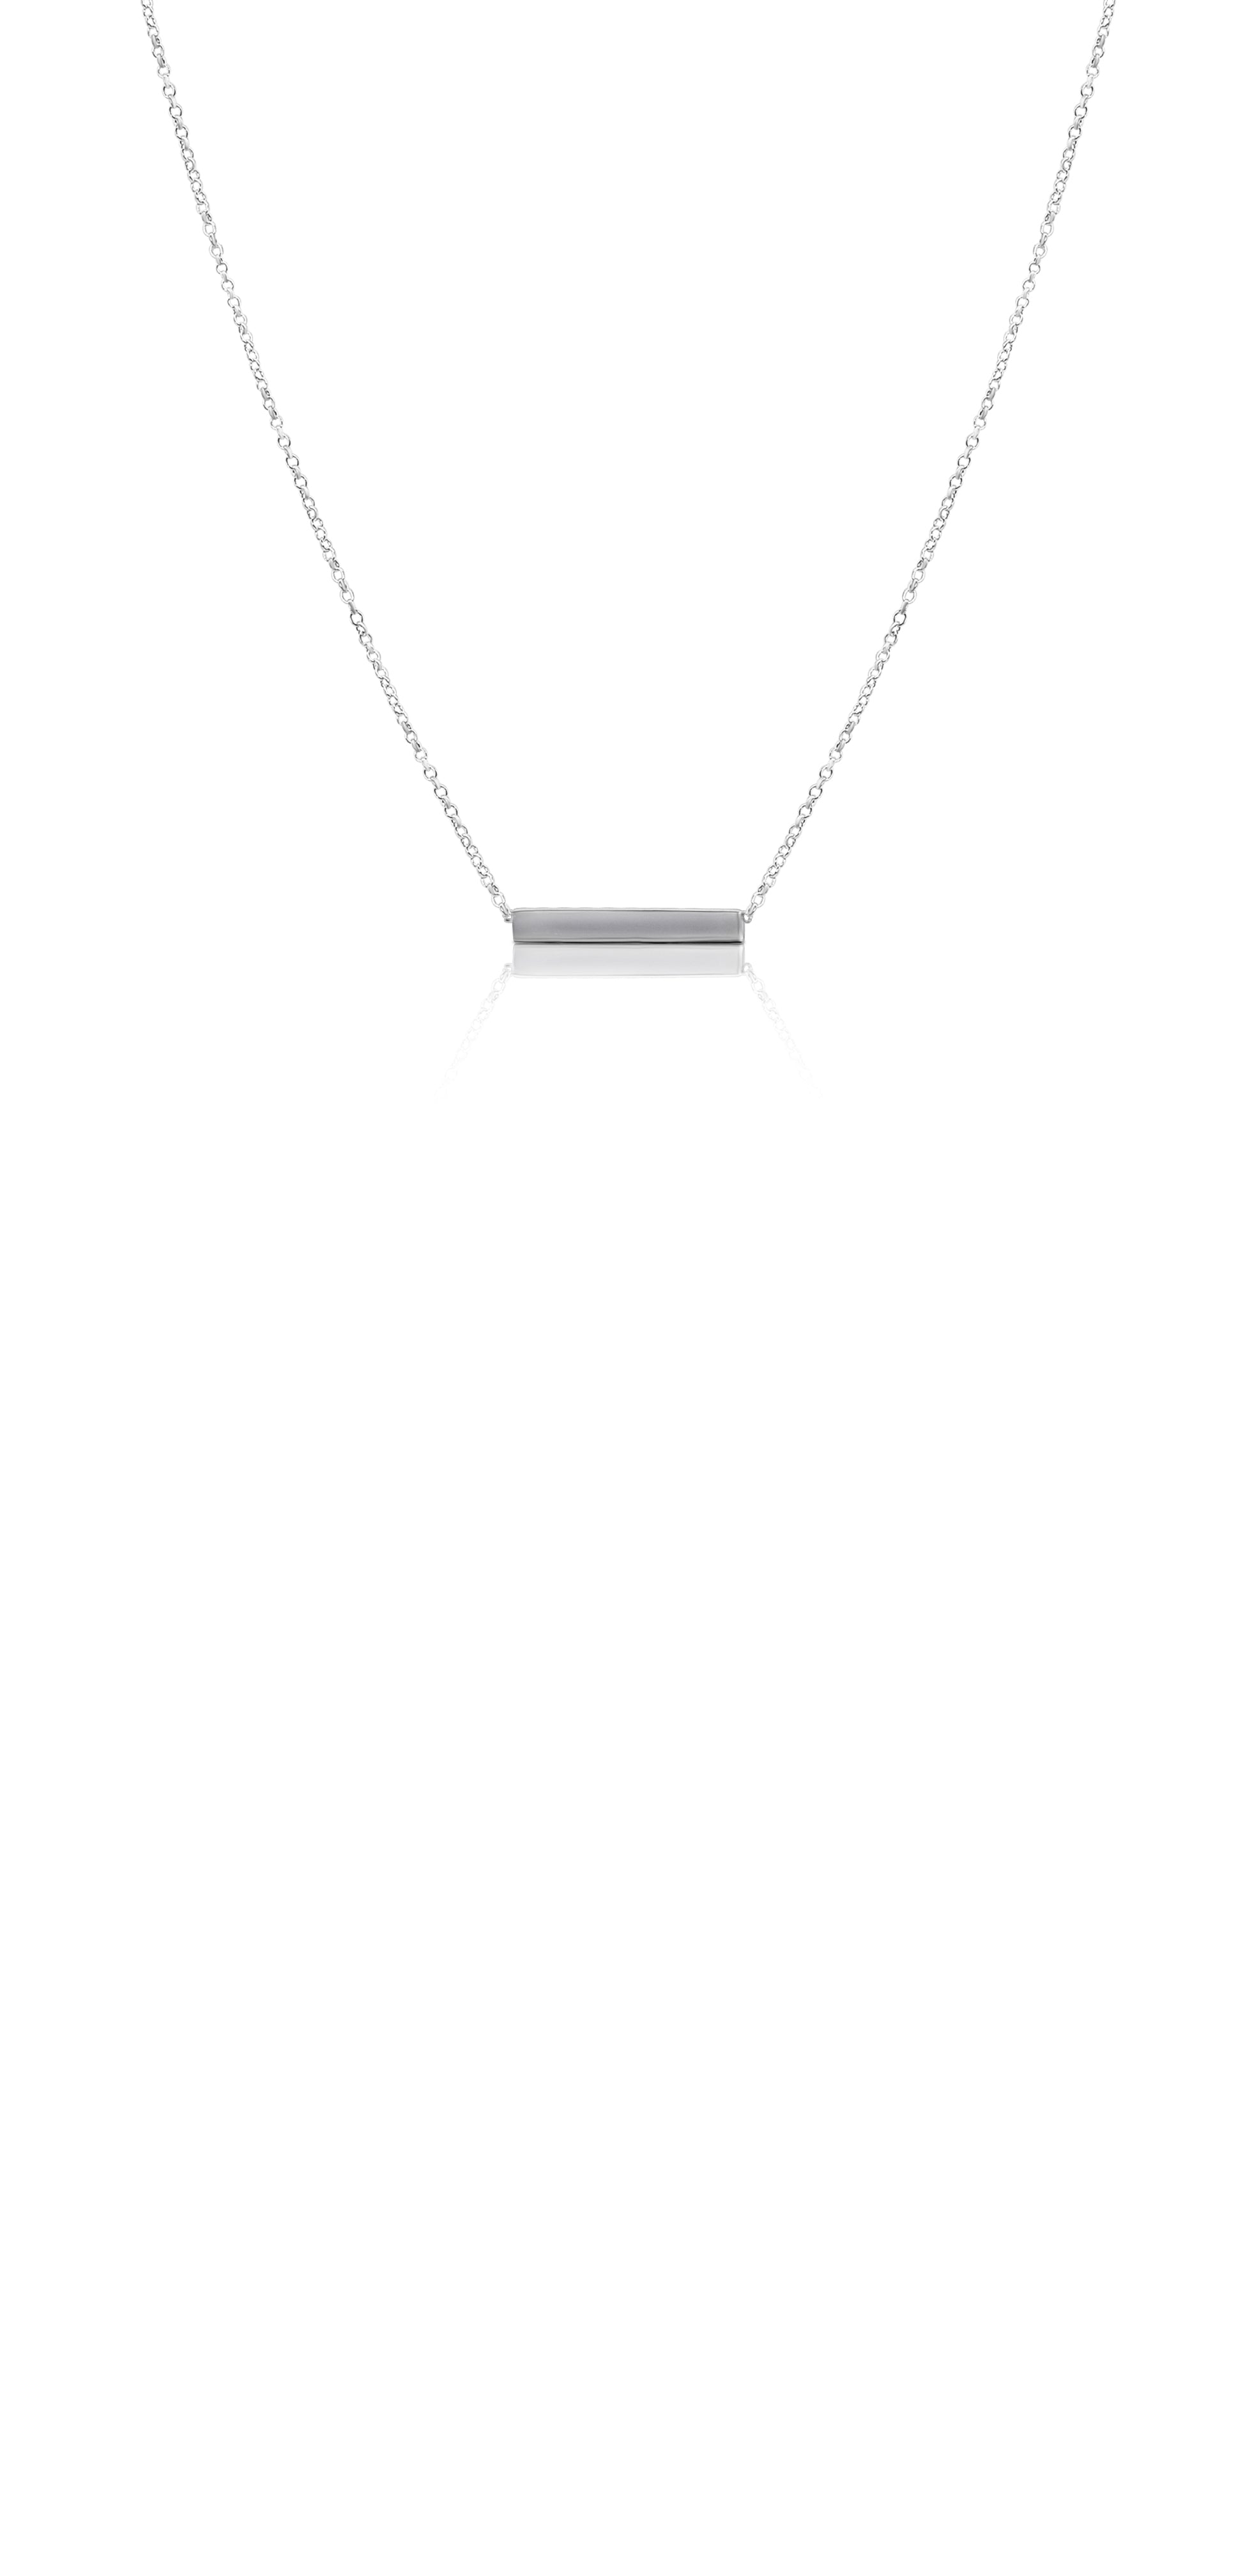 Ór Collection 9Ct White Gold Solid Bar Necklace